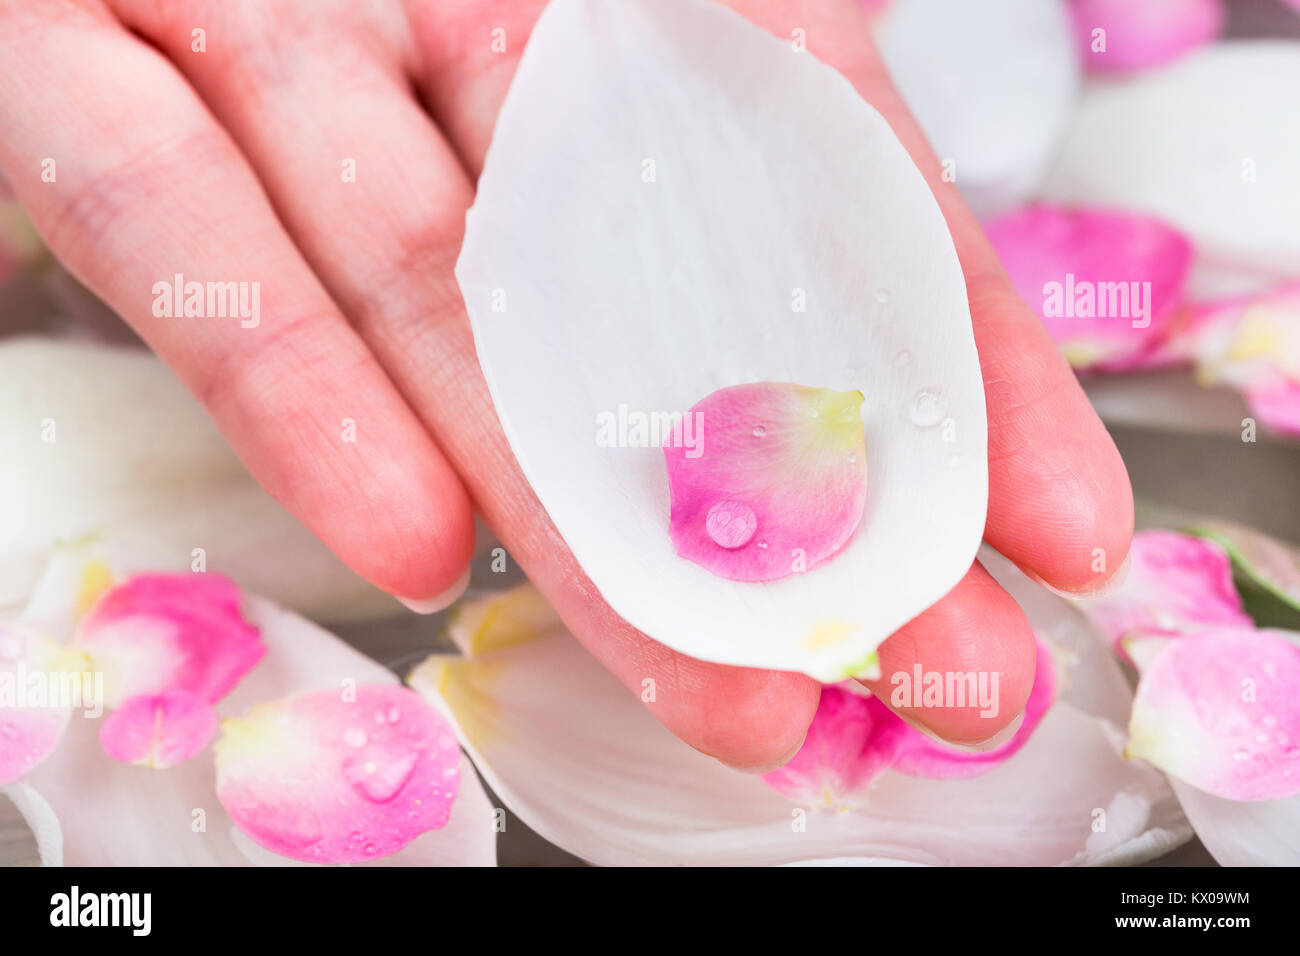 nature, environment, care concept. on the edge of the palm of caucasian woman there are few petals placed one in other, white of tulip bud and small pink from cherry bloom Stock Photo